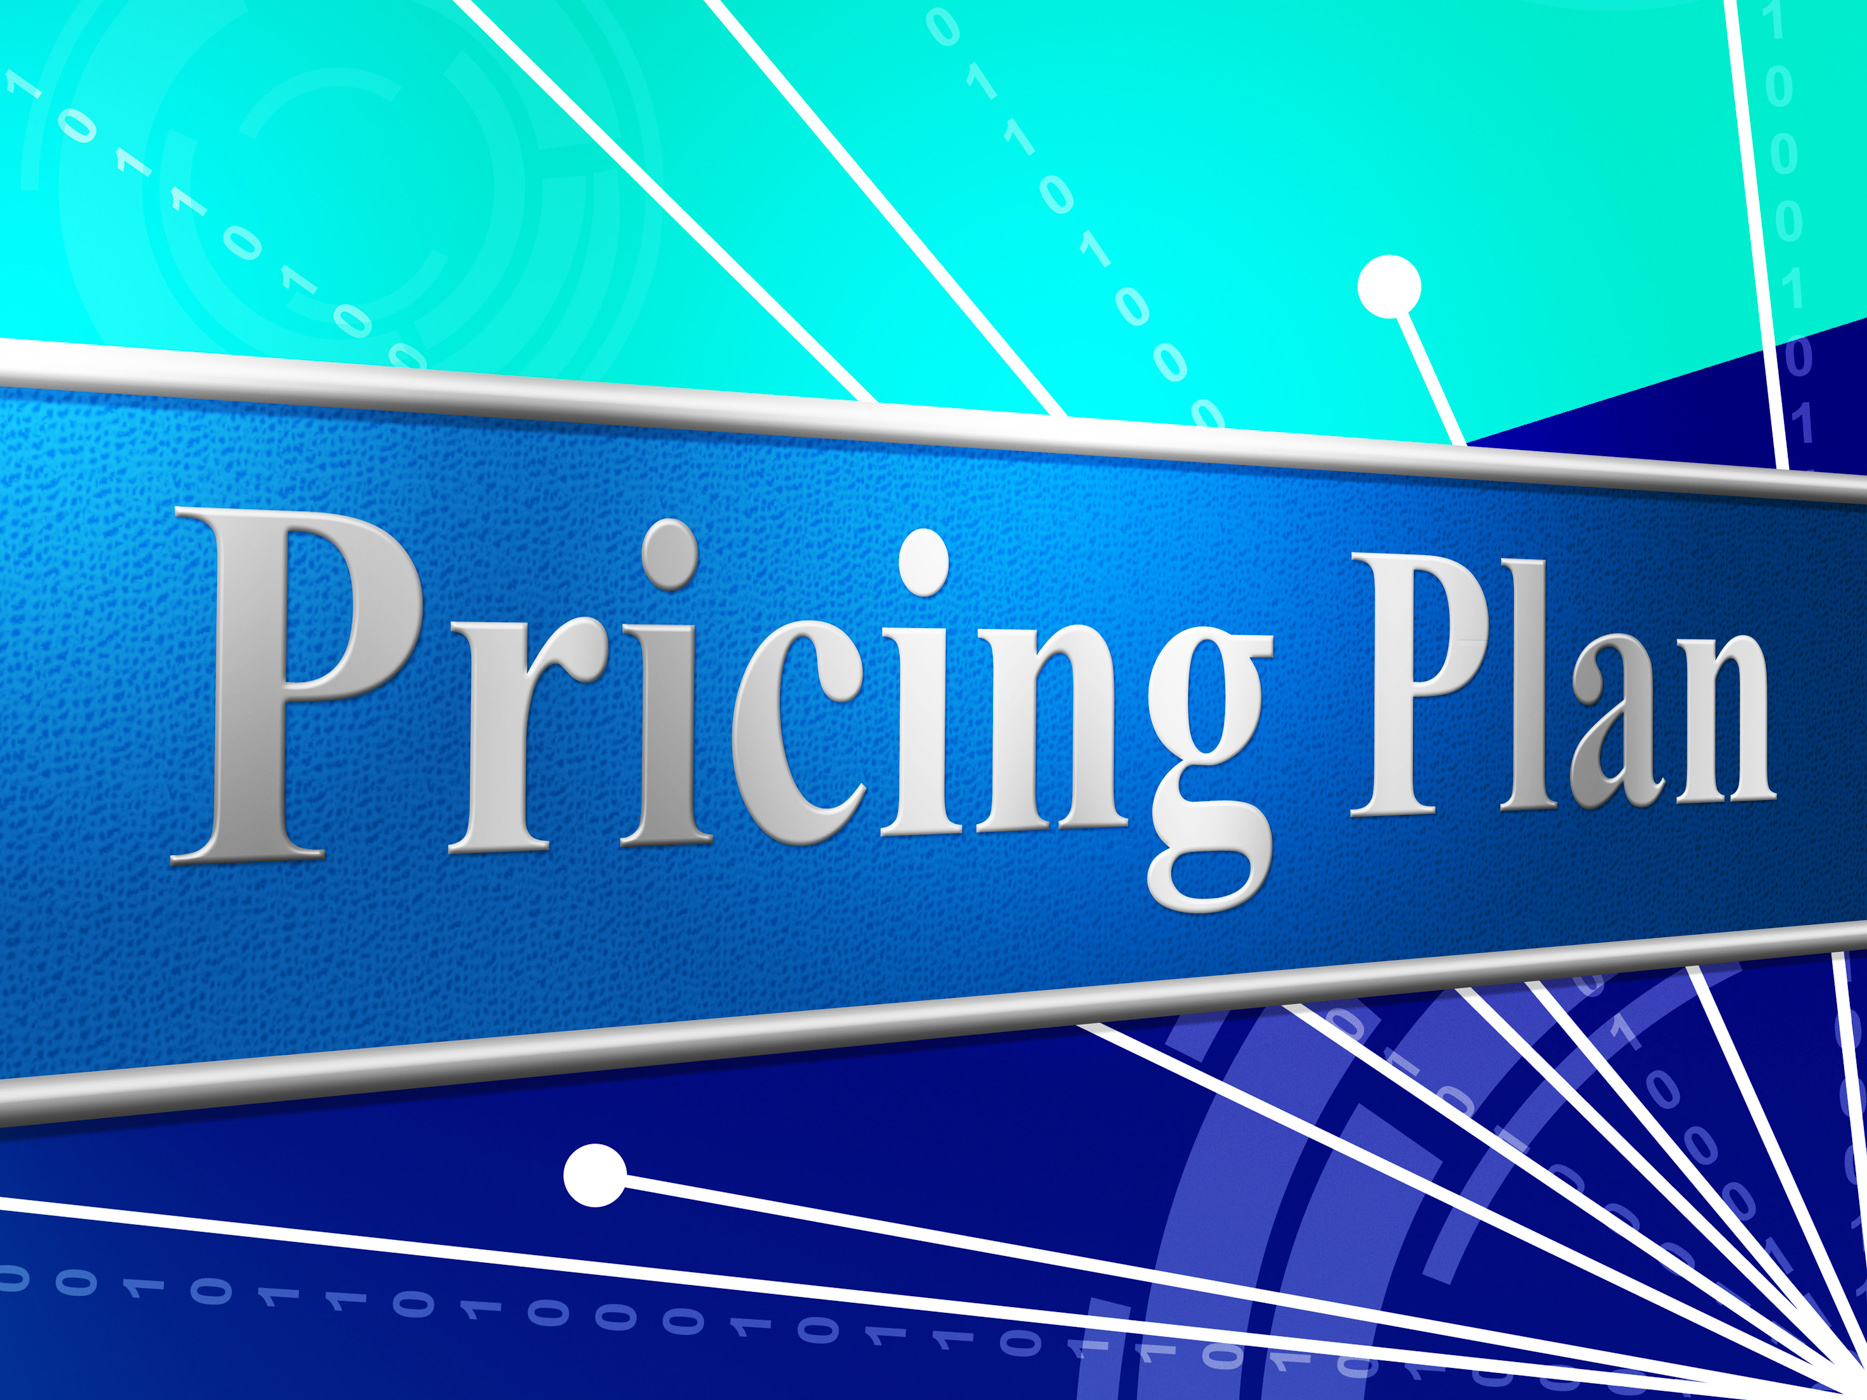 Pricing plan represents stratagem strategy and idea photo